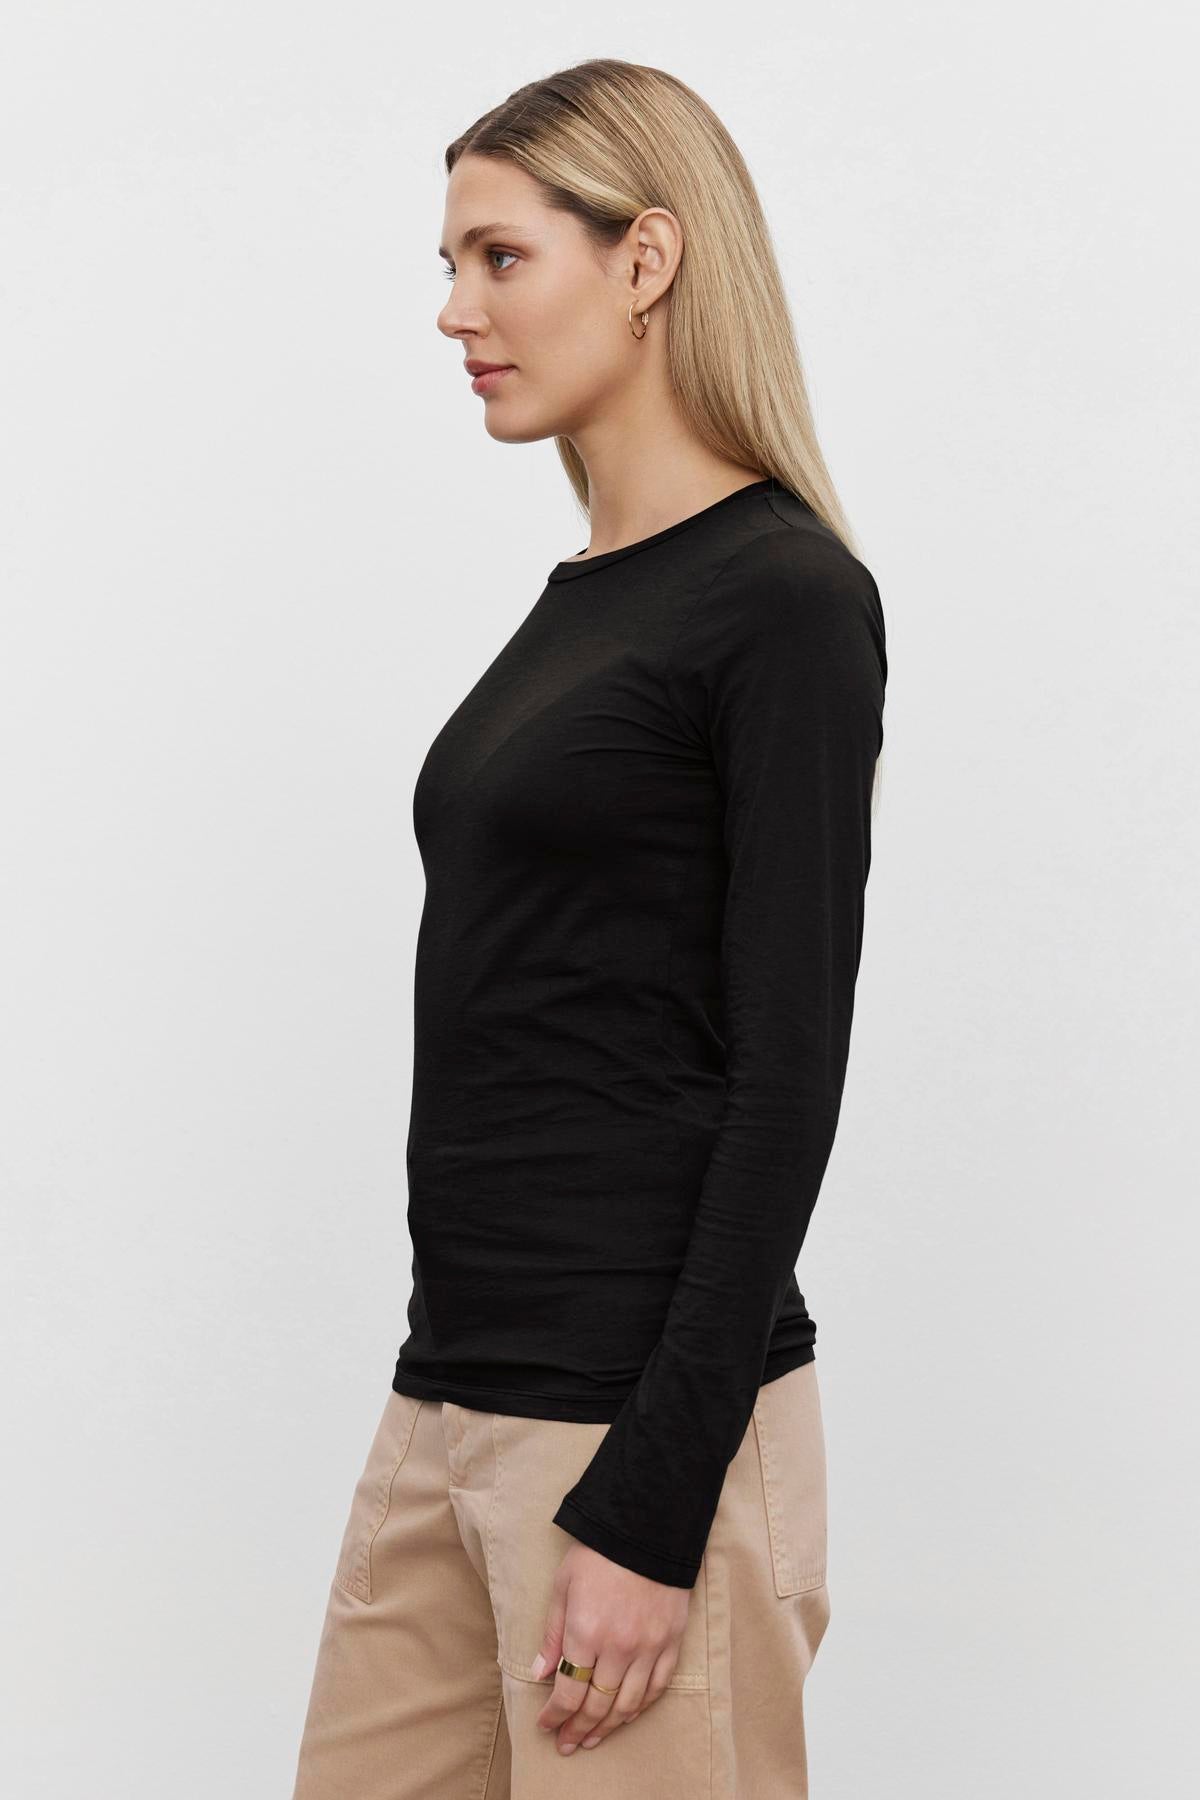 A person with long blonde hair is seen in profile, wearing the ultra-soft gauzy whisper black ZOFINA TEE by Velvet by Graham & Spencer and light-colored pants. The background is plain white.-37648649945281